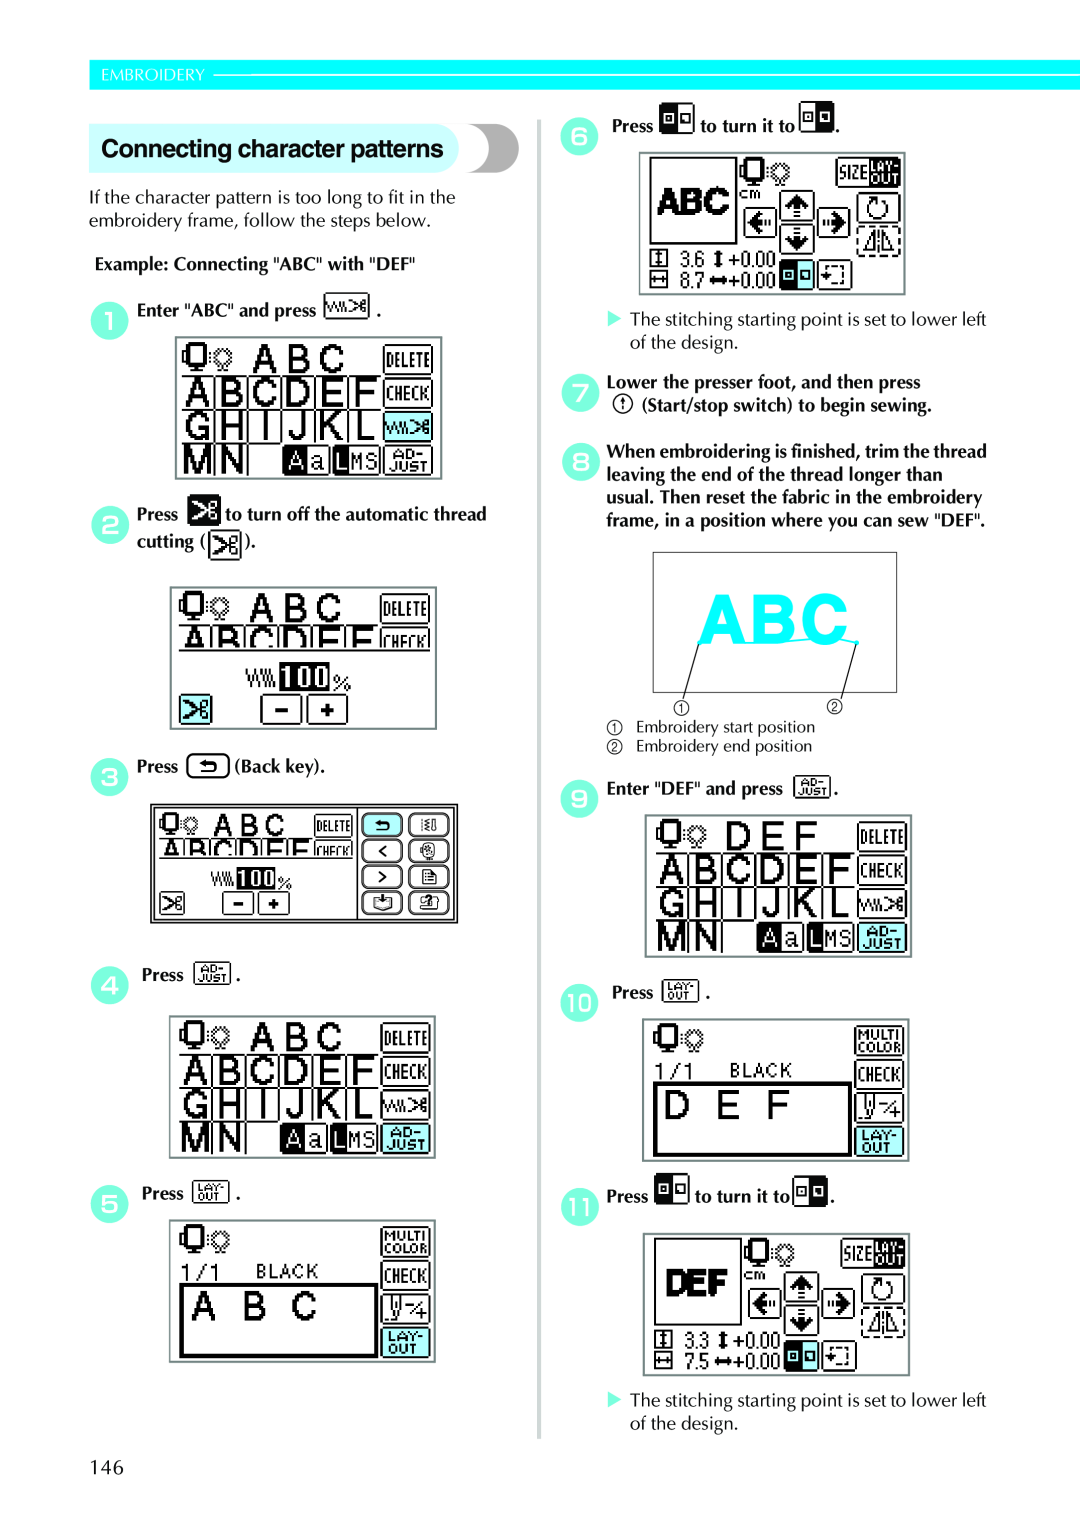 Brother 885-V33, 885-V31 operation manual Connecting character patterns, Embroidery 